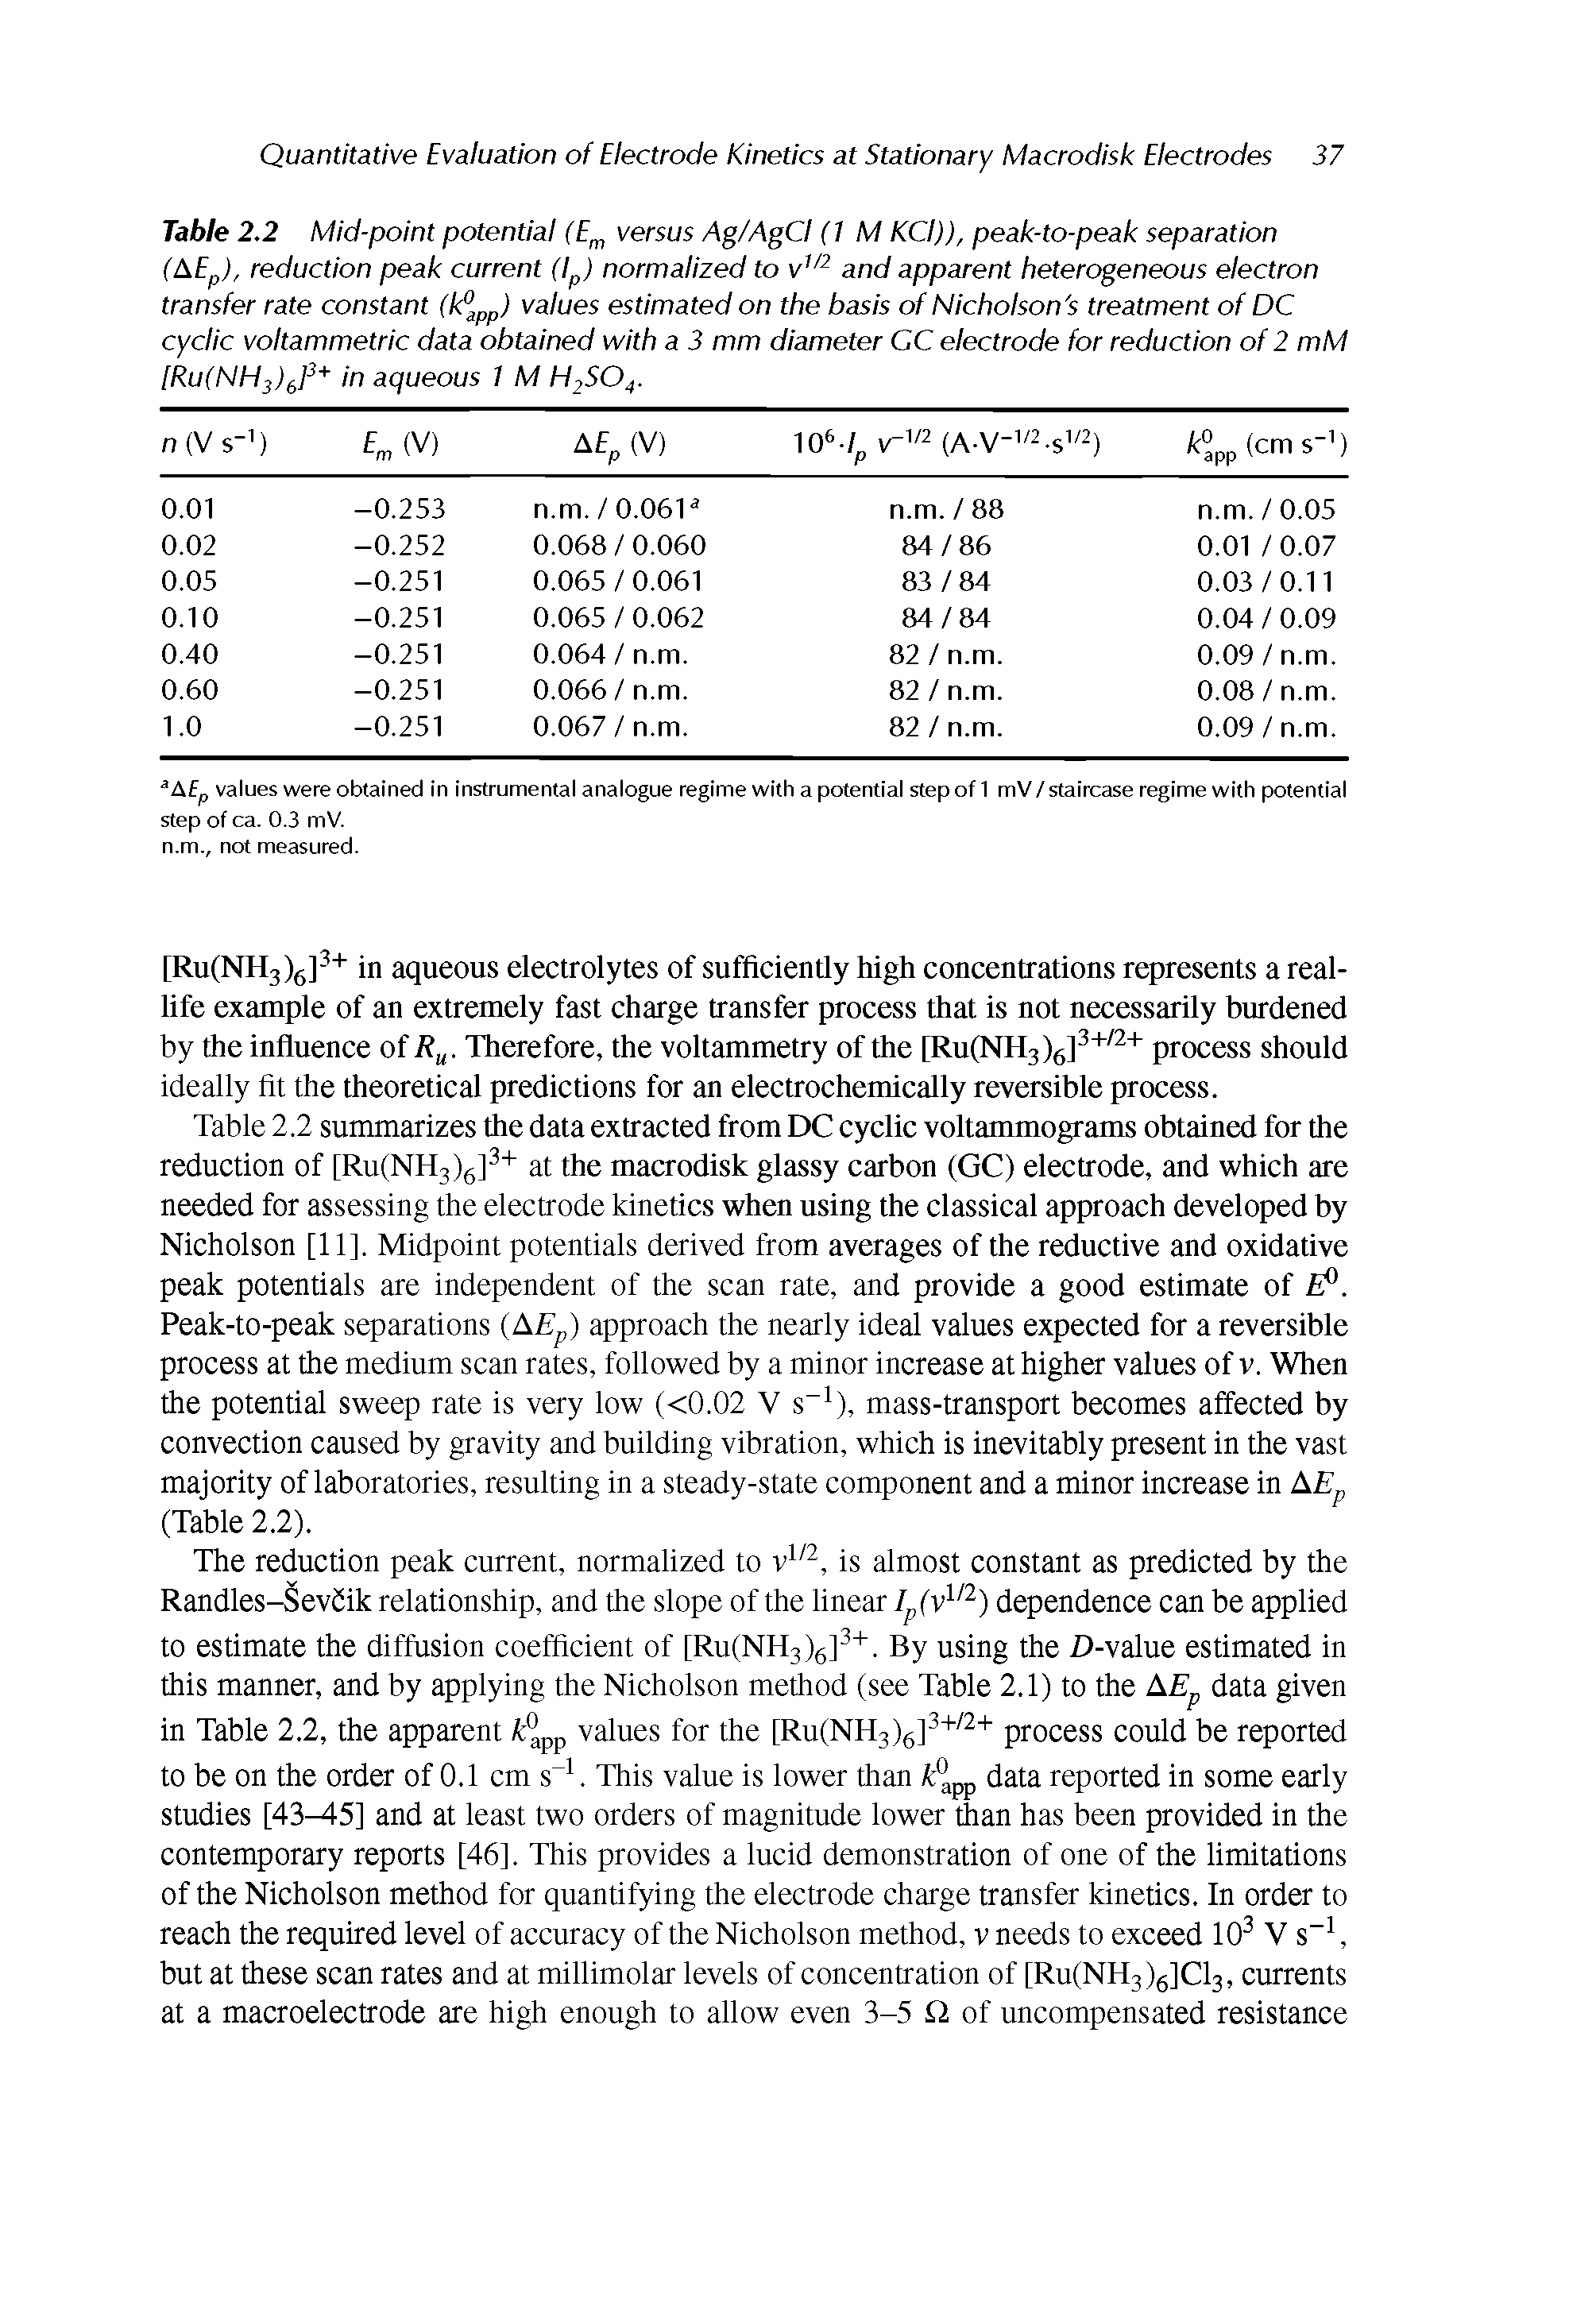 Table 2.2 Mid-point potential (E versus Ag/AgCI (1 M KCI)), peak-to-peak separation ( Ep), reduction peak current (Ip) normalized to v and apparent heterogeneous electron transfer rate constant (kP pp) values estimated on the basis of Nicholson s treatment of DC cyclic voltammetric data obtained with a 3 mm diameter CC electrode for reduction of 2 mM [RufNH ii P in aqueous 1 M H2SO4.